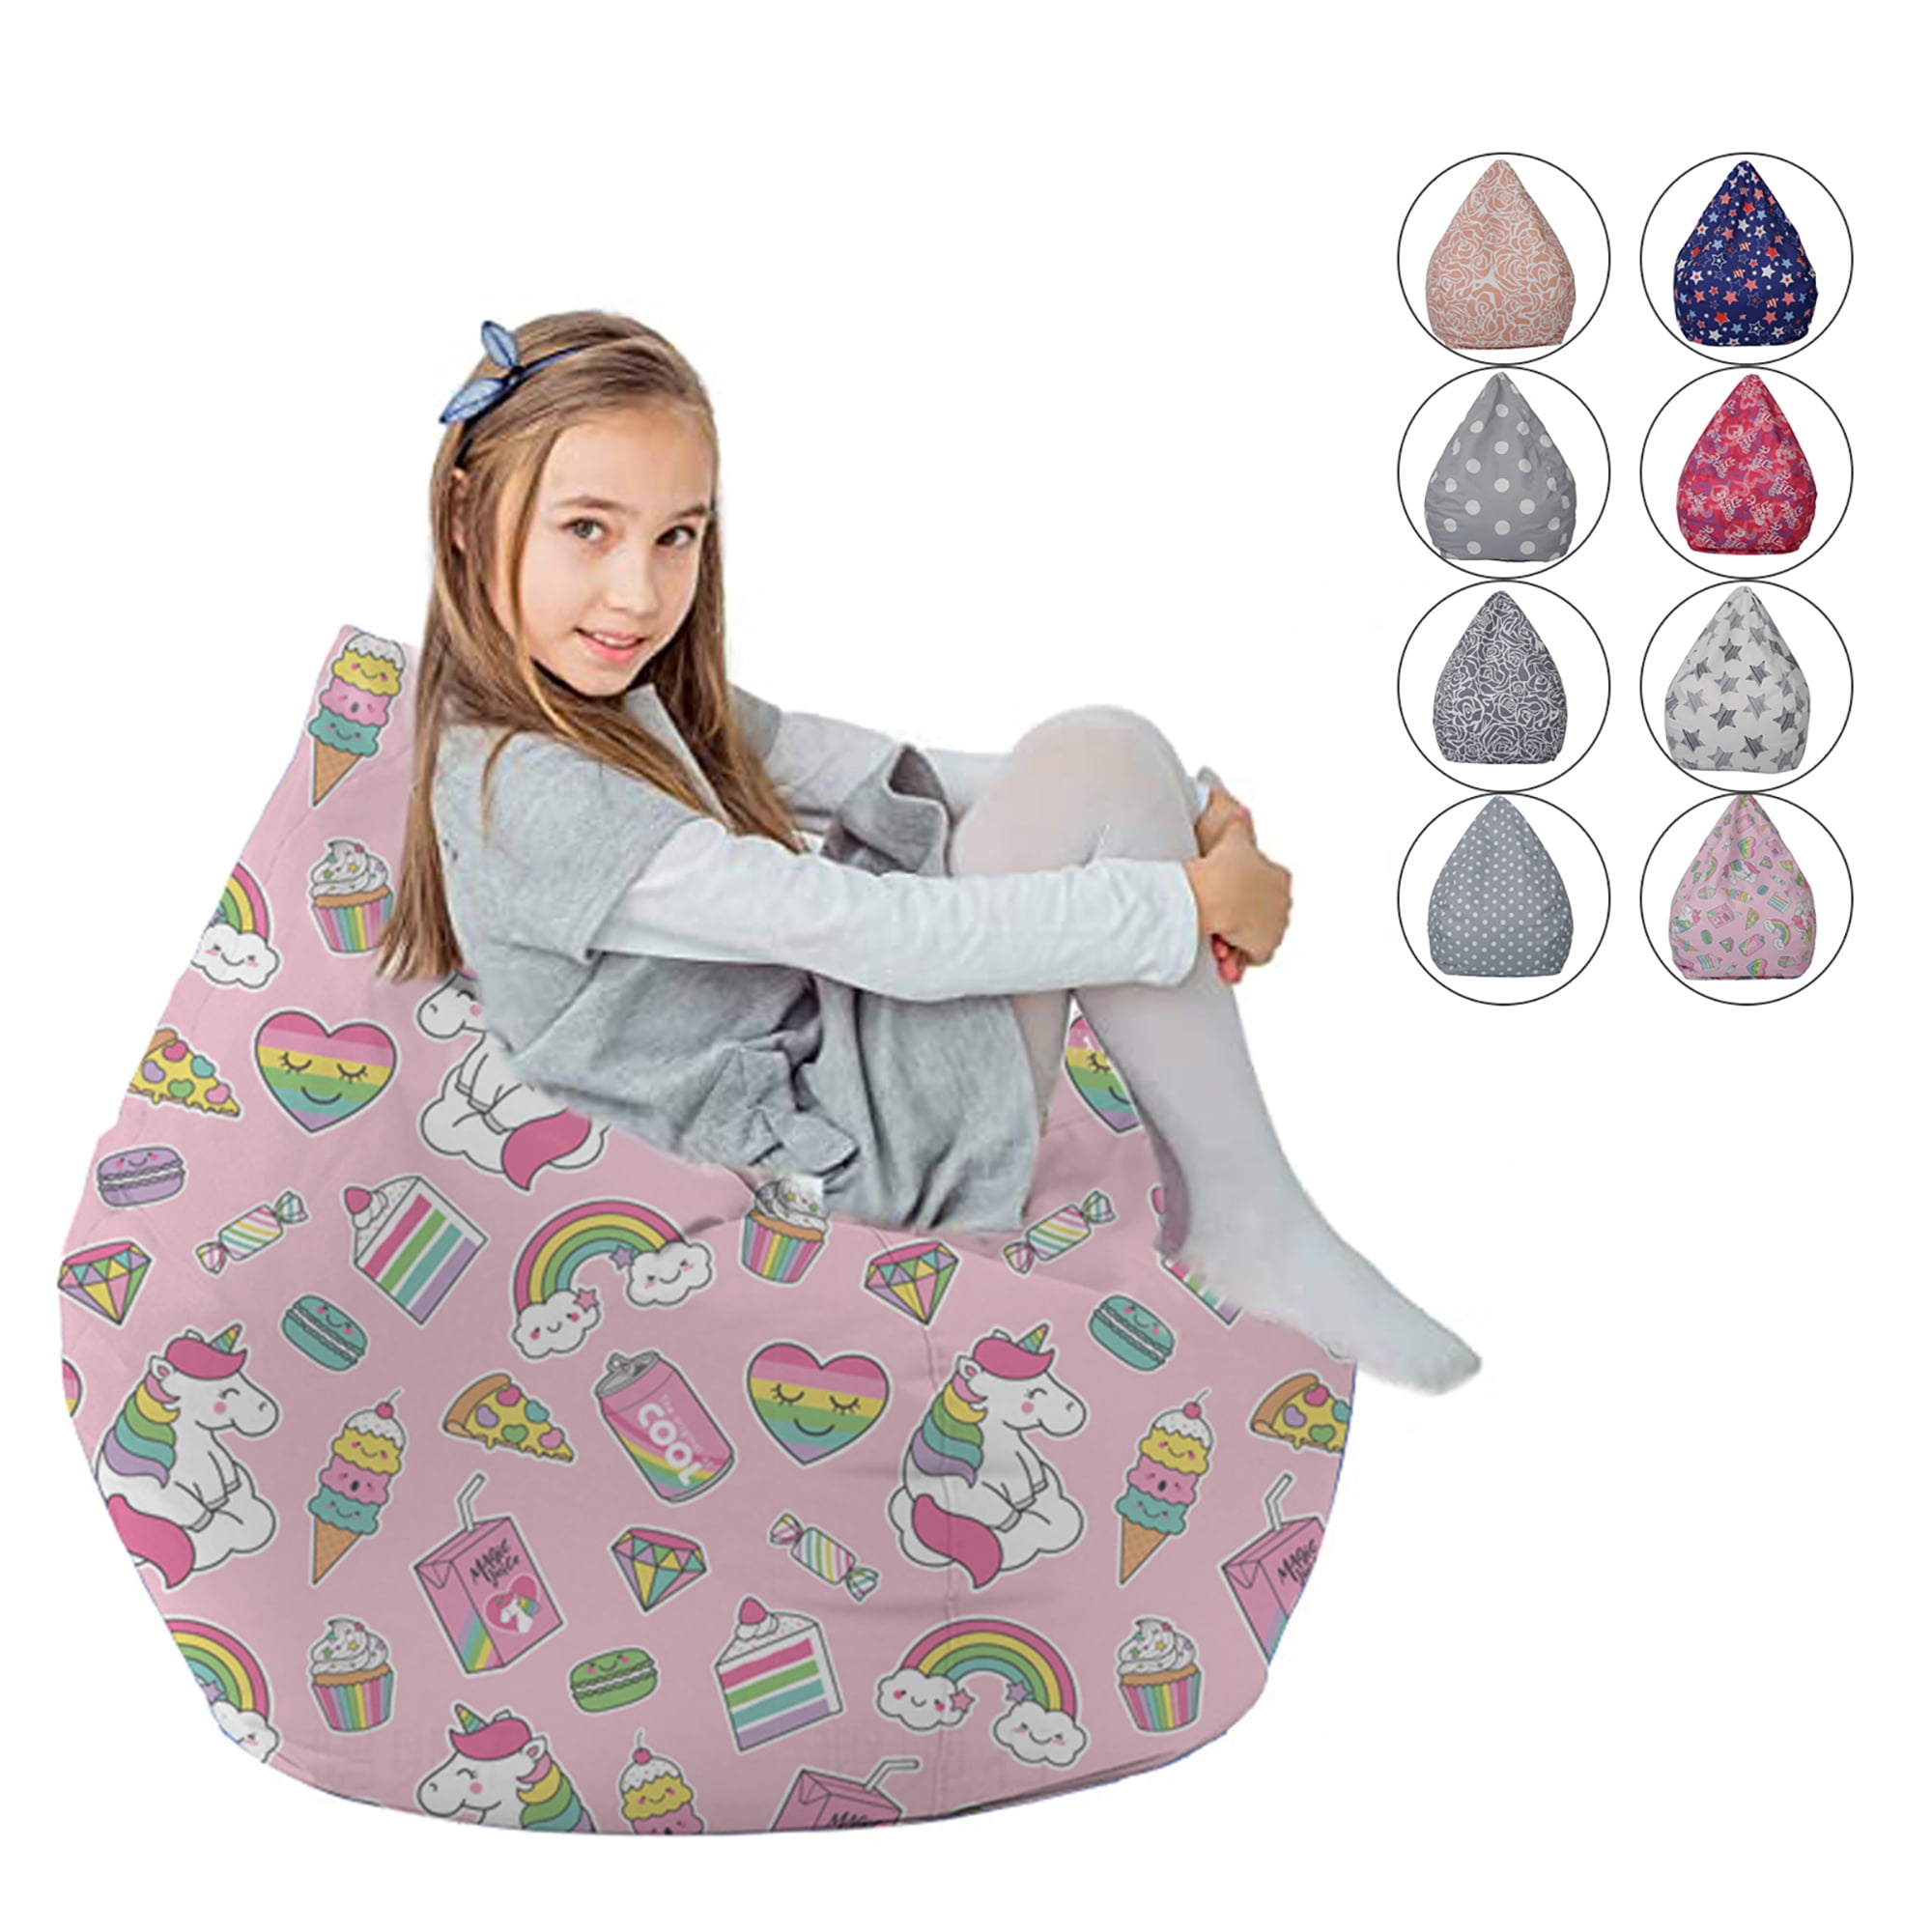 Bean Bag Cover Without Filler, Cute Printed Lounger Sack ...